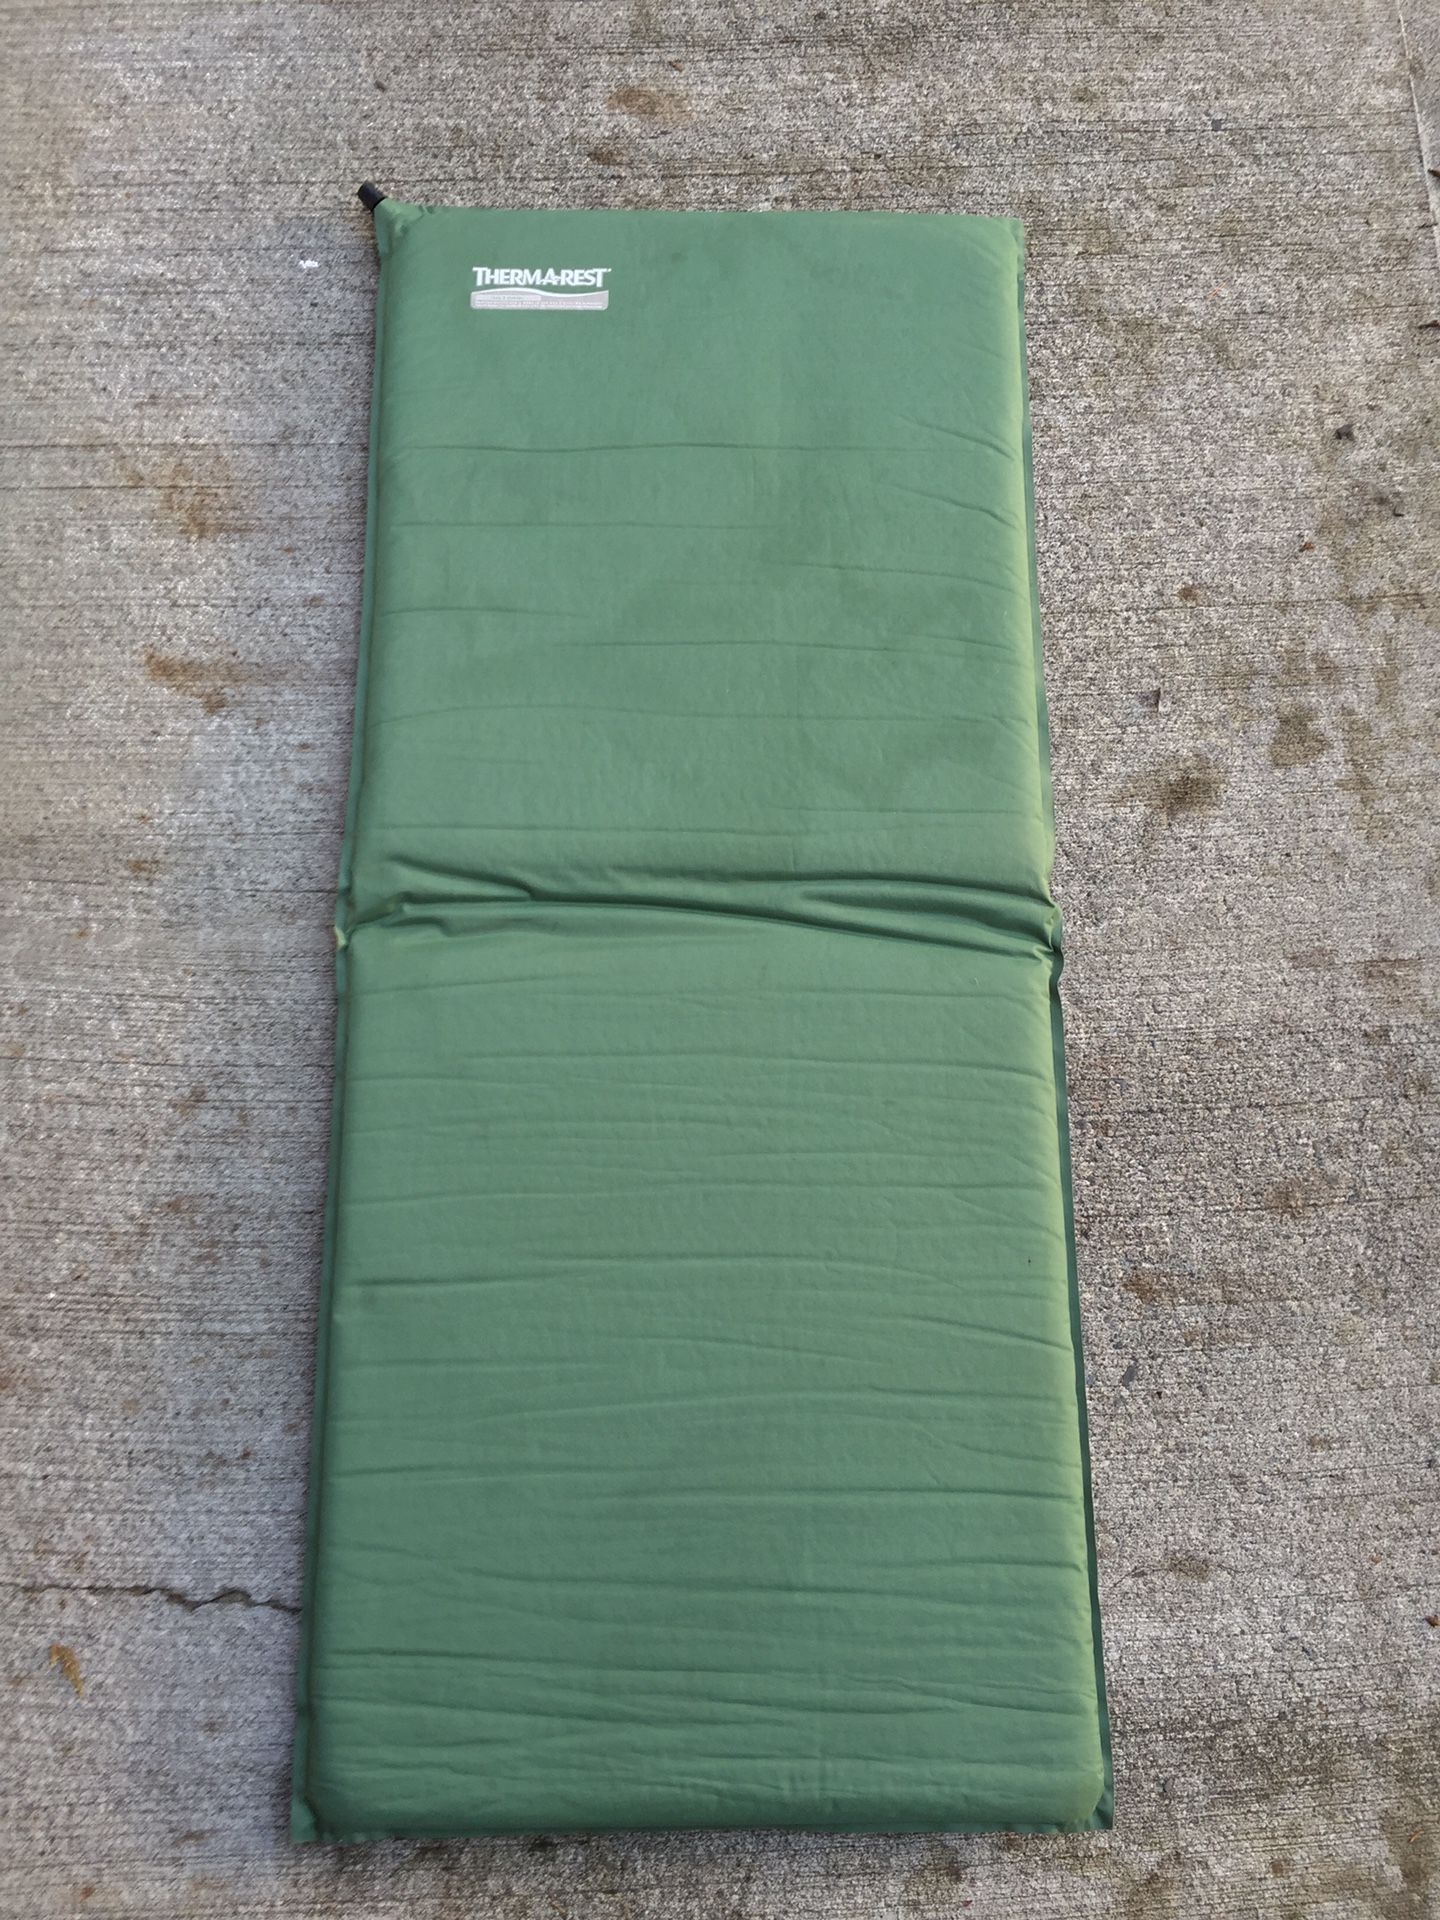 Thermarest Backpacking Hiking Mattress